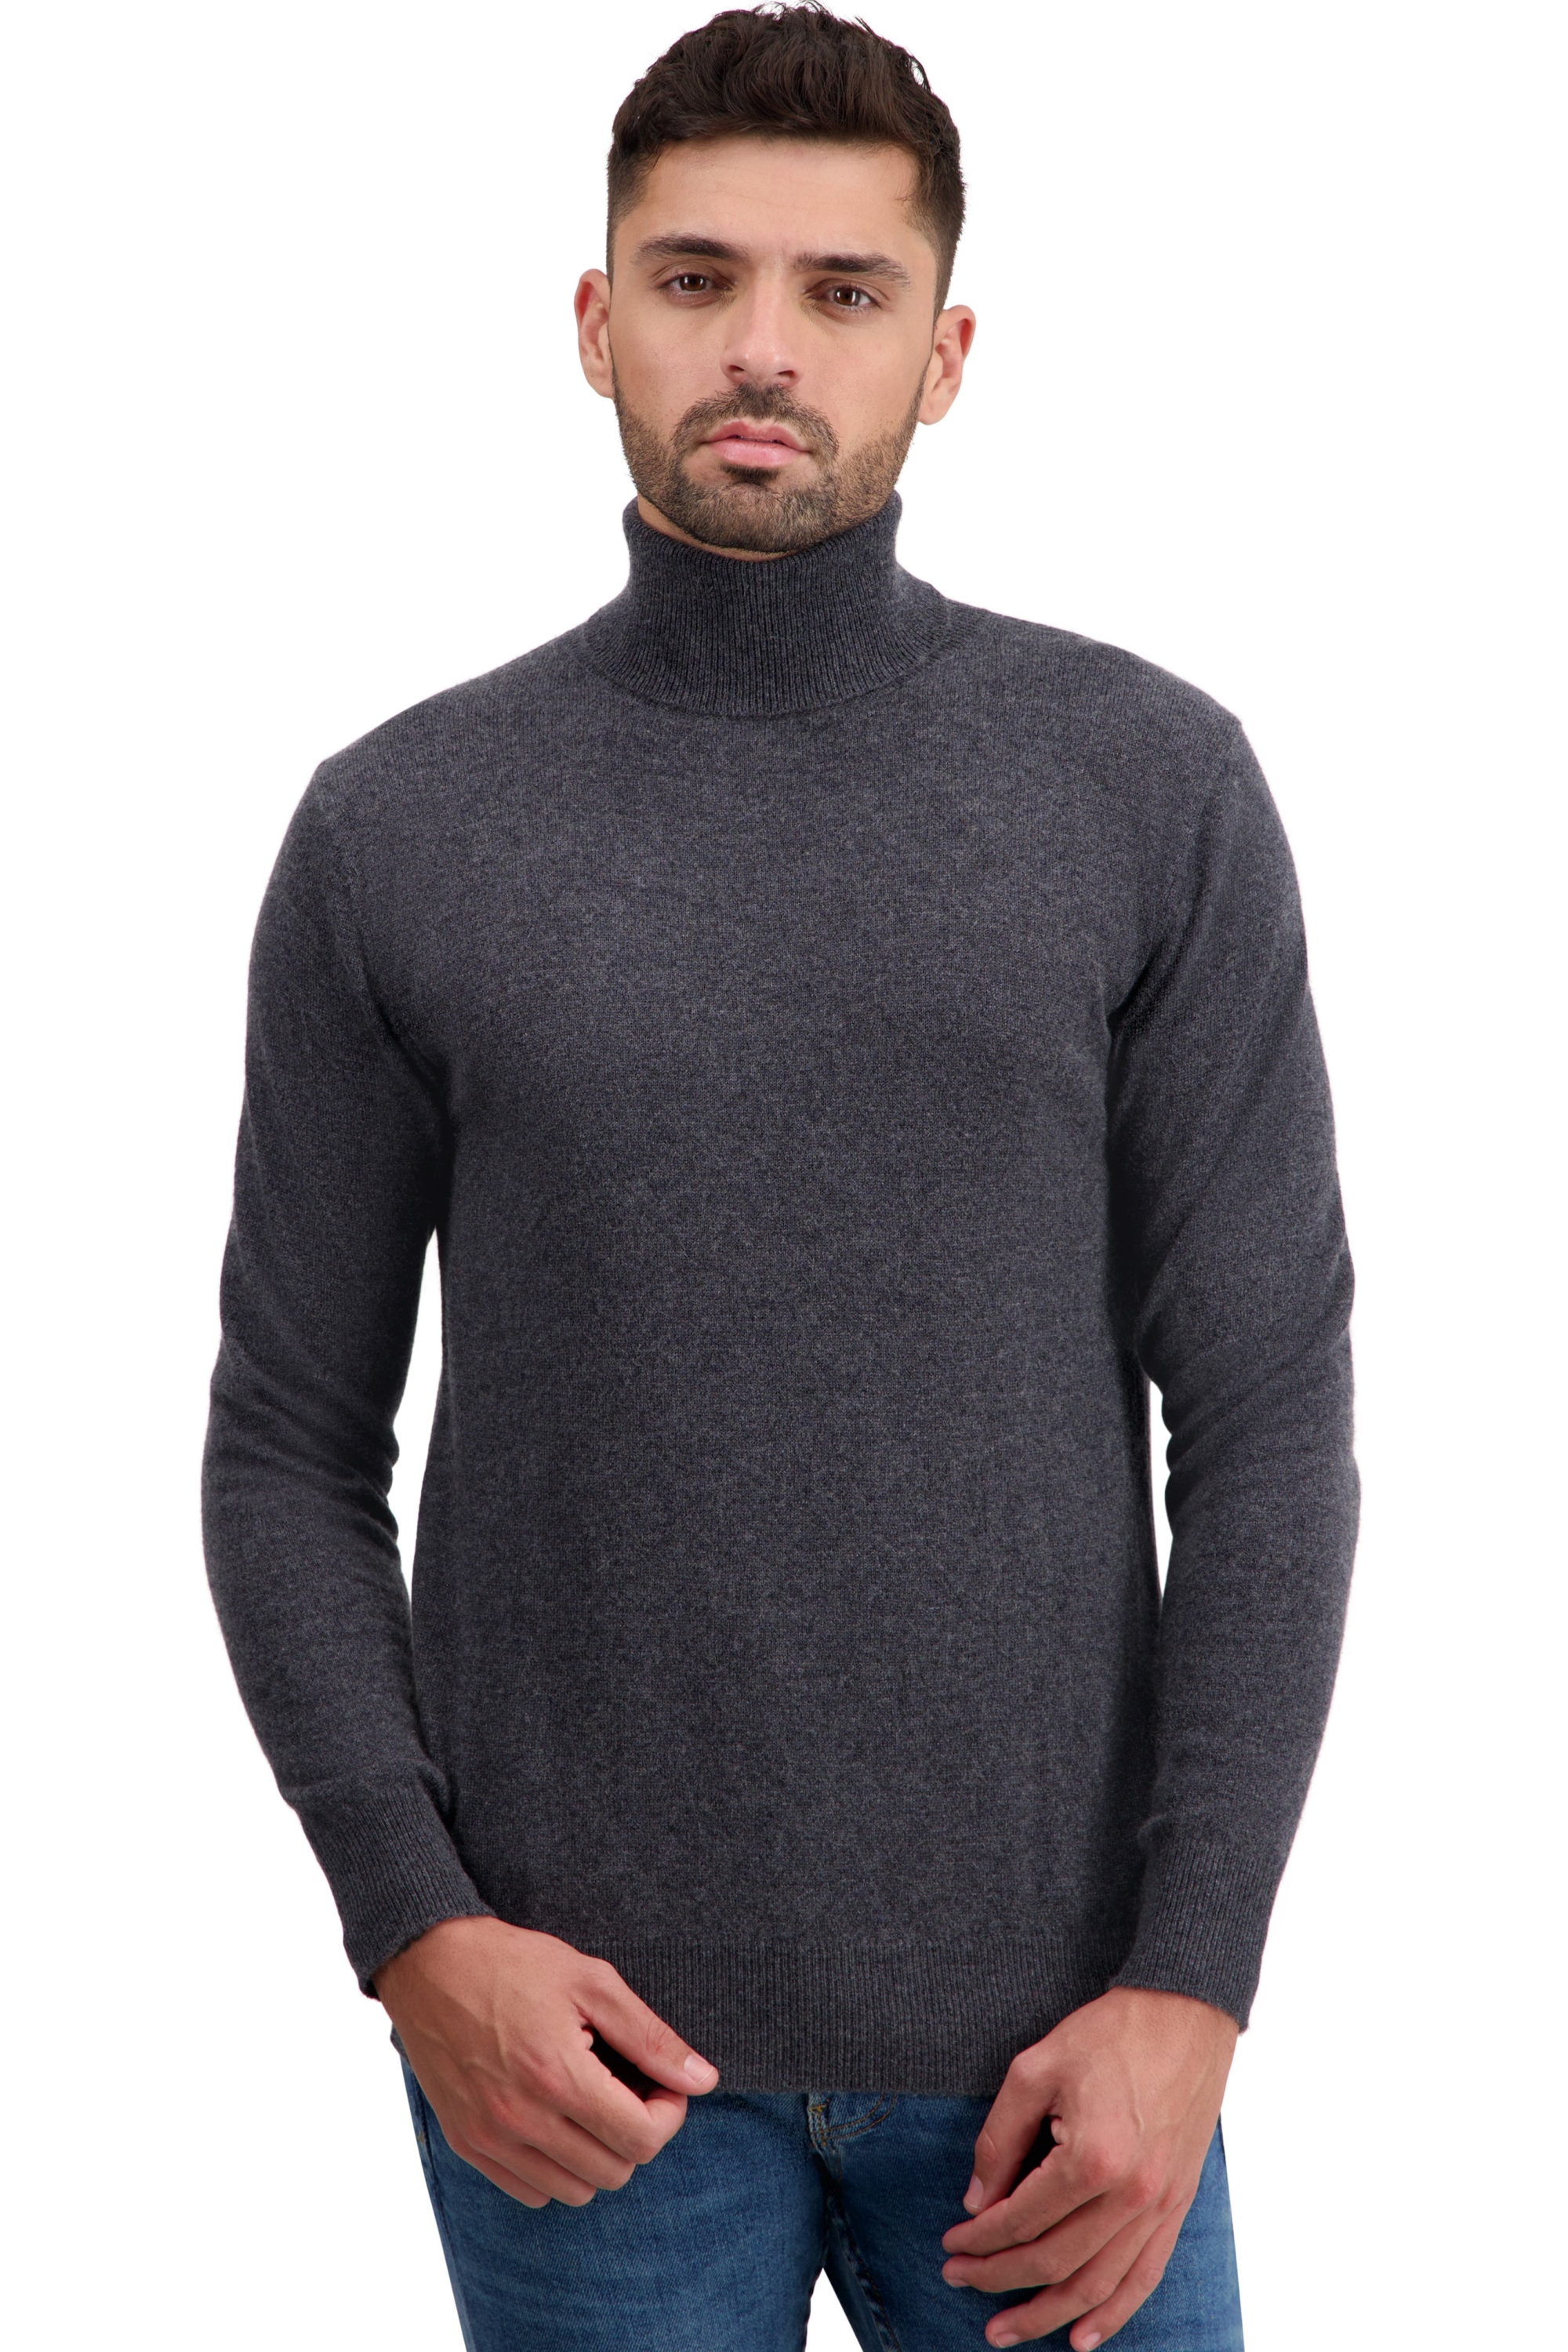 Cashmere men low prices tarry first grey melange s